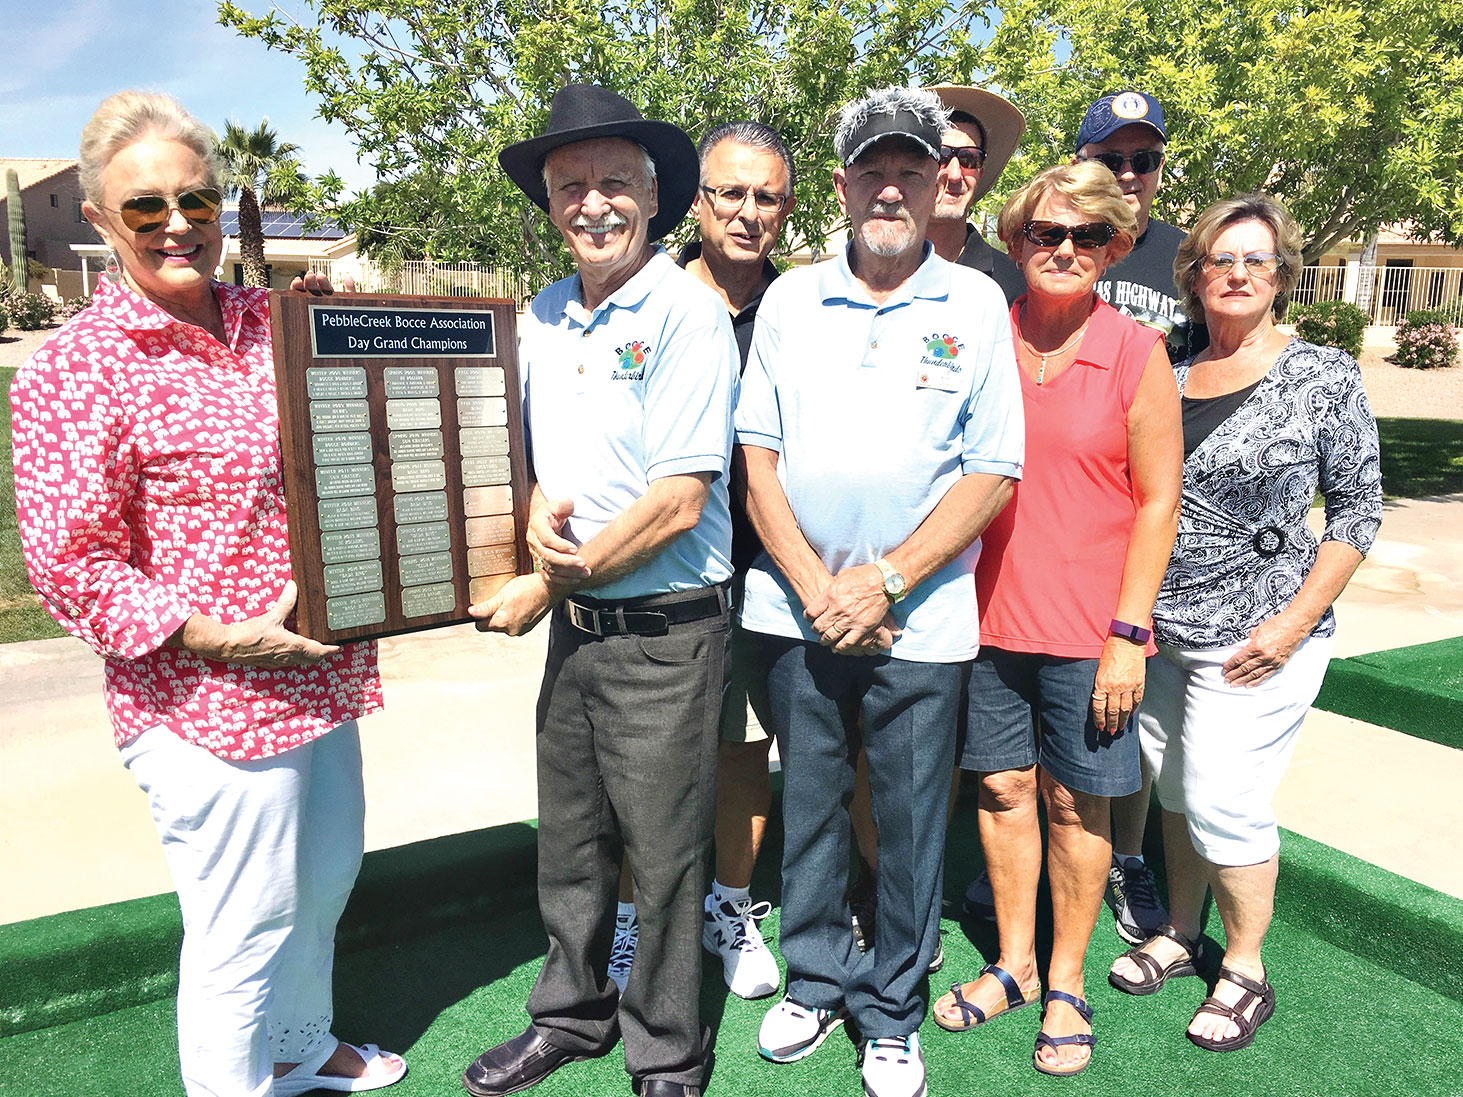 Winter Day League Grand Champion Thunderbirds, front row, left to right: President Cheryl Kasselmann, Captain Lloyd Smith, Co-Captain Ron Jacobs, Bev Loding and Ardys Smith; back row: Richard Squillace, Alex Potapoff and Bernard Blake